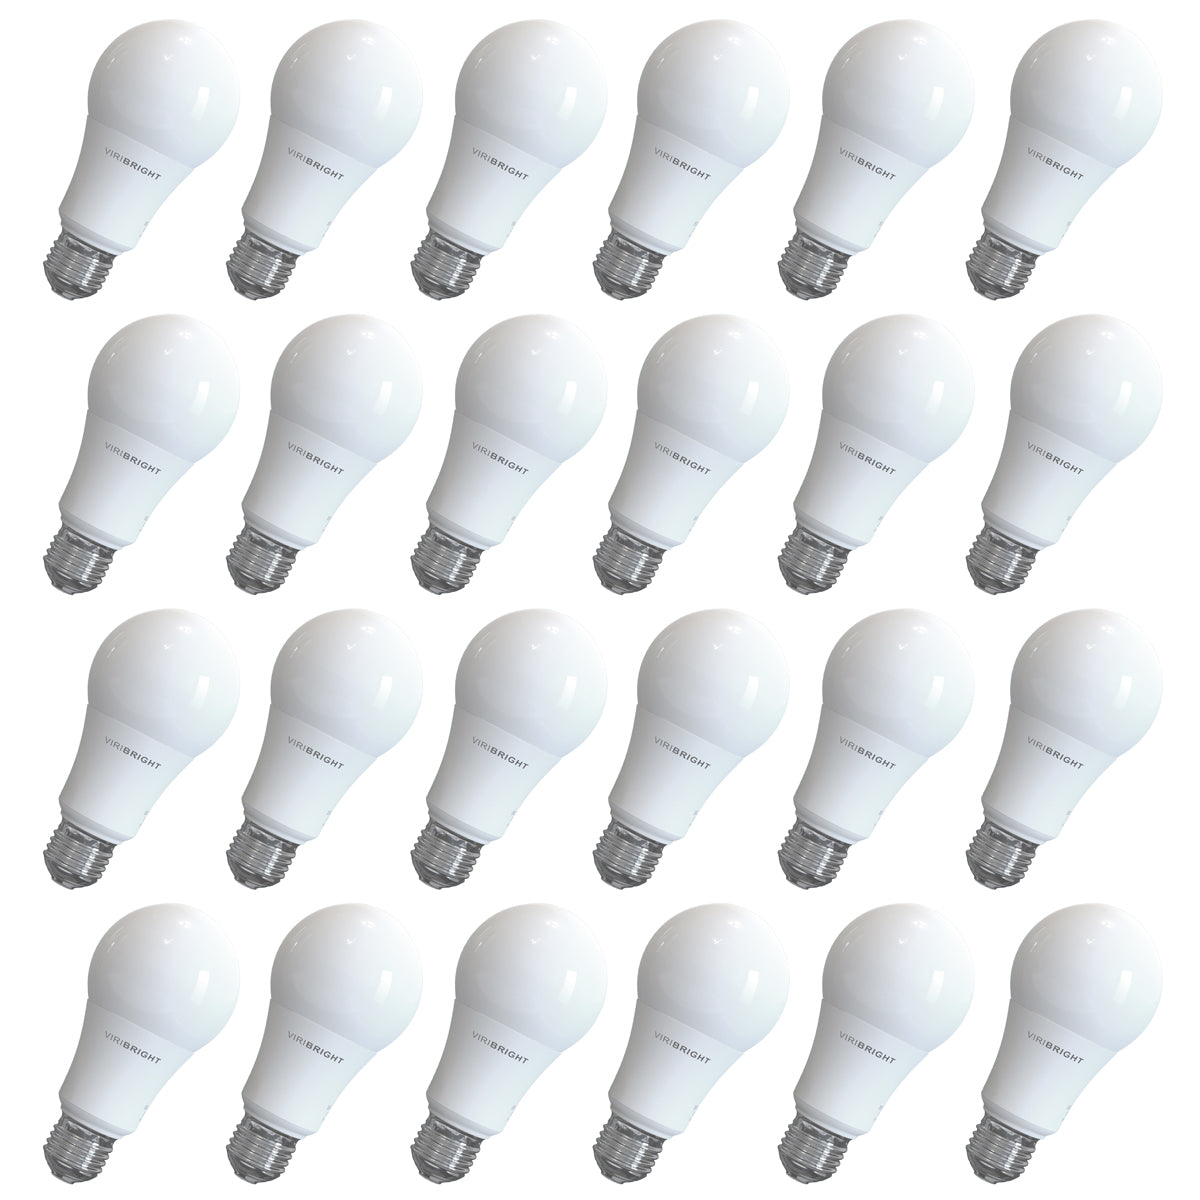 Durable and shatter-resistant LED bulb